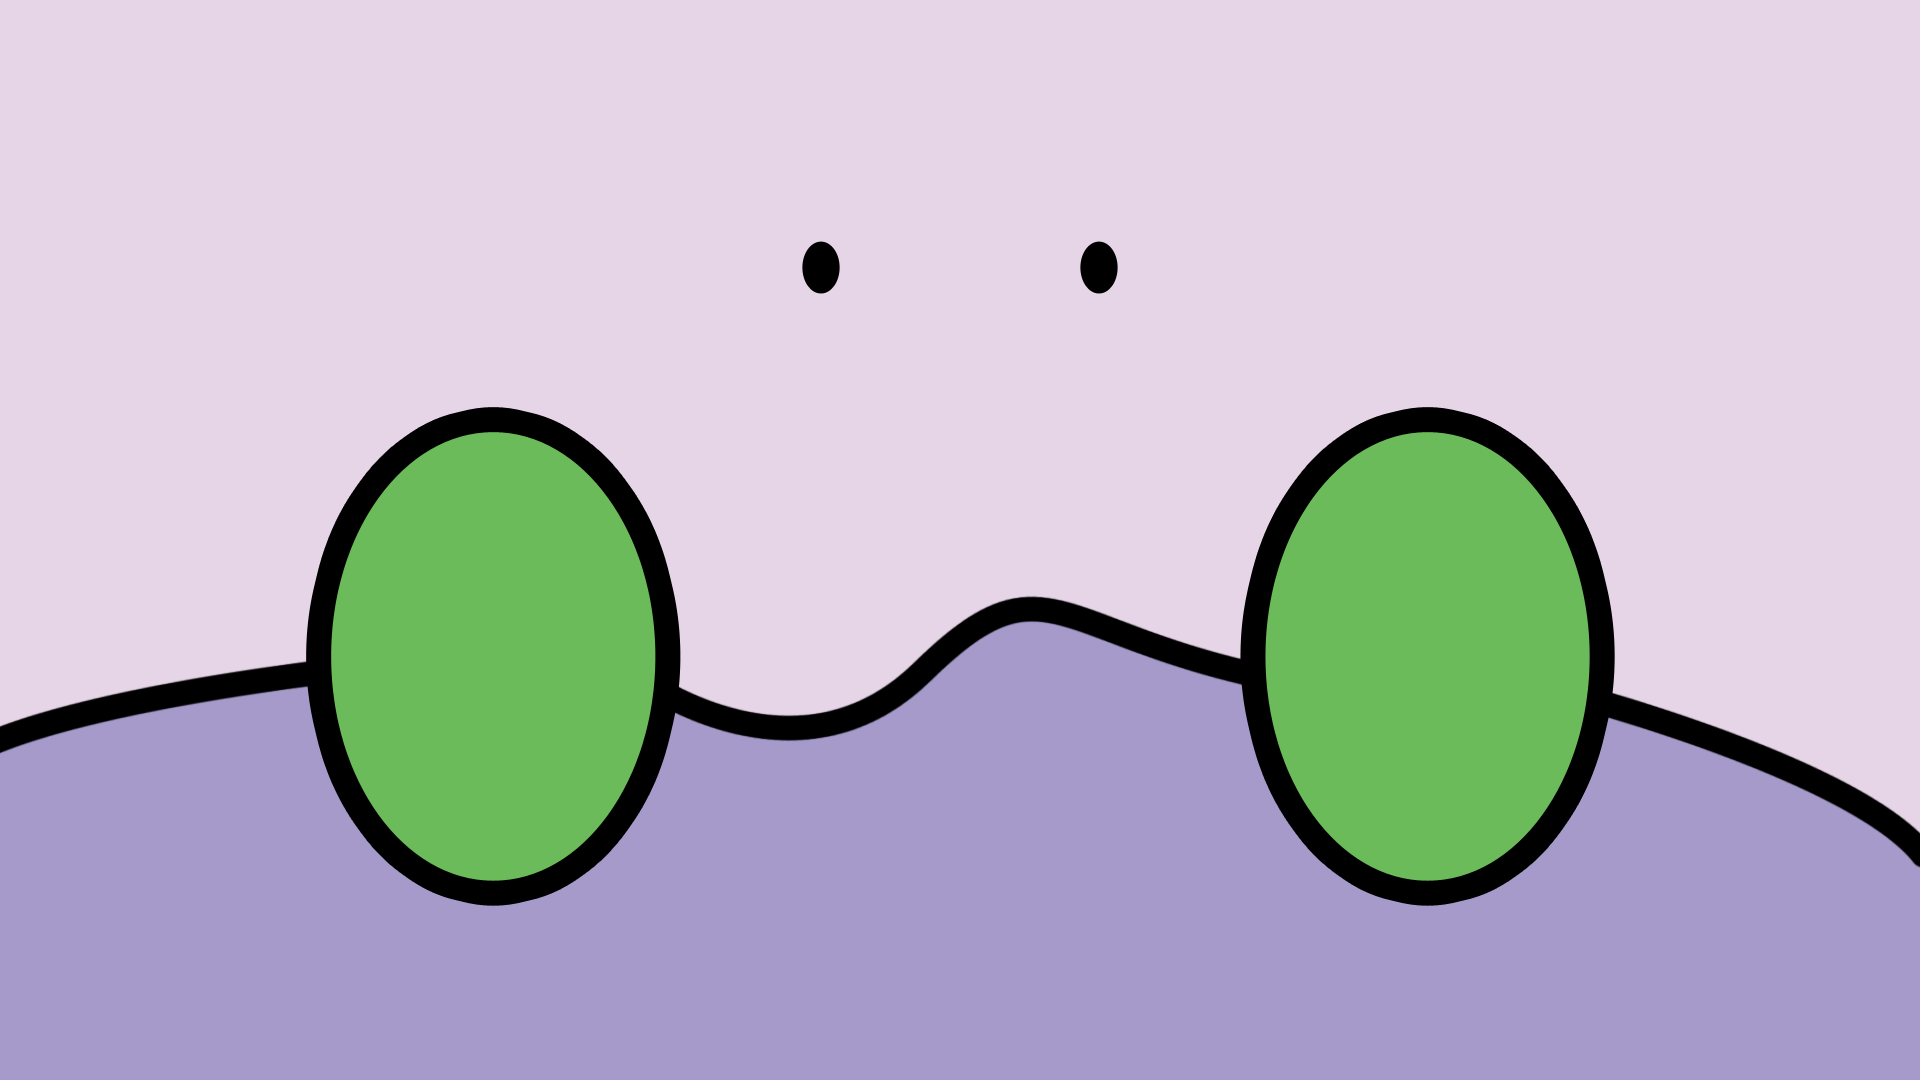 I made a wallpaper for you Goomy lovers